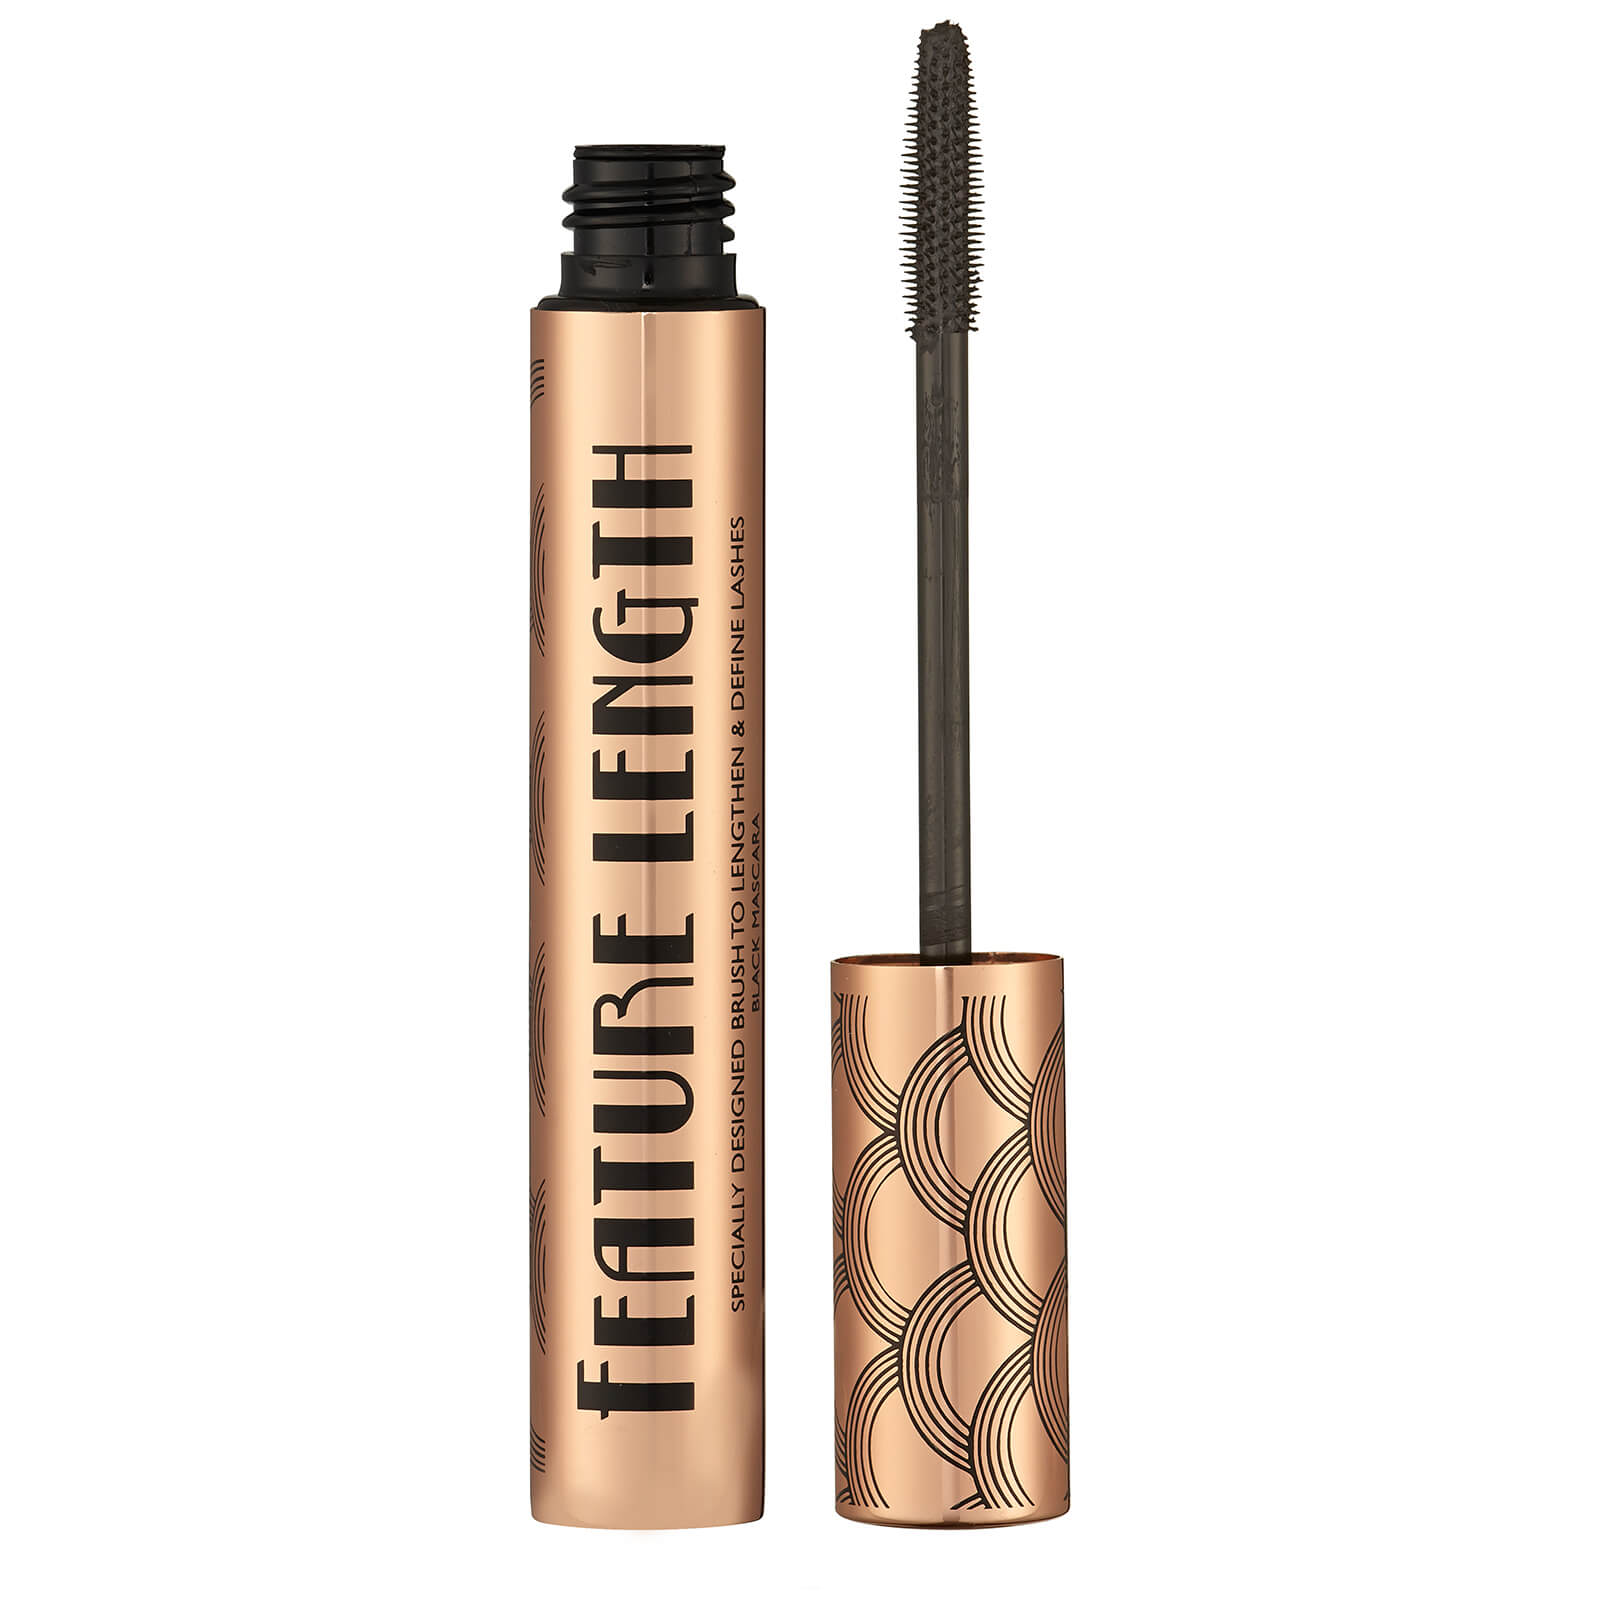 Image of Barry M Cosmetics Feature Length Mascara